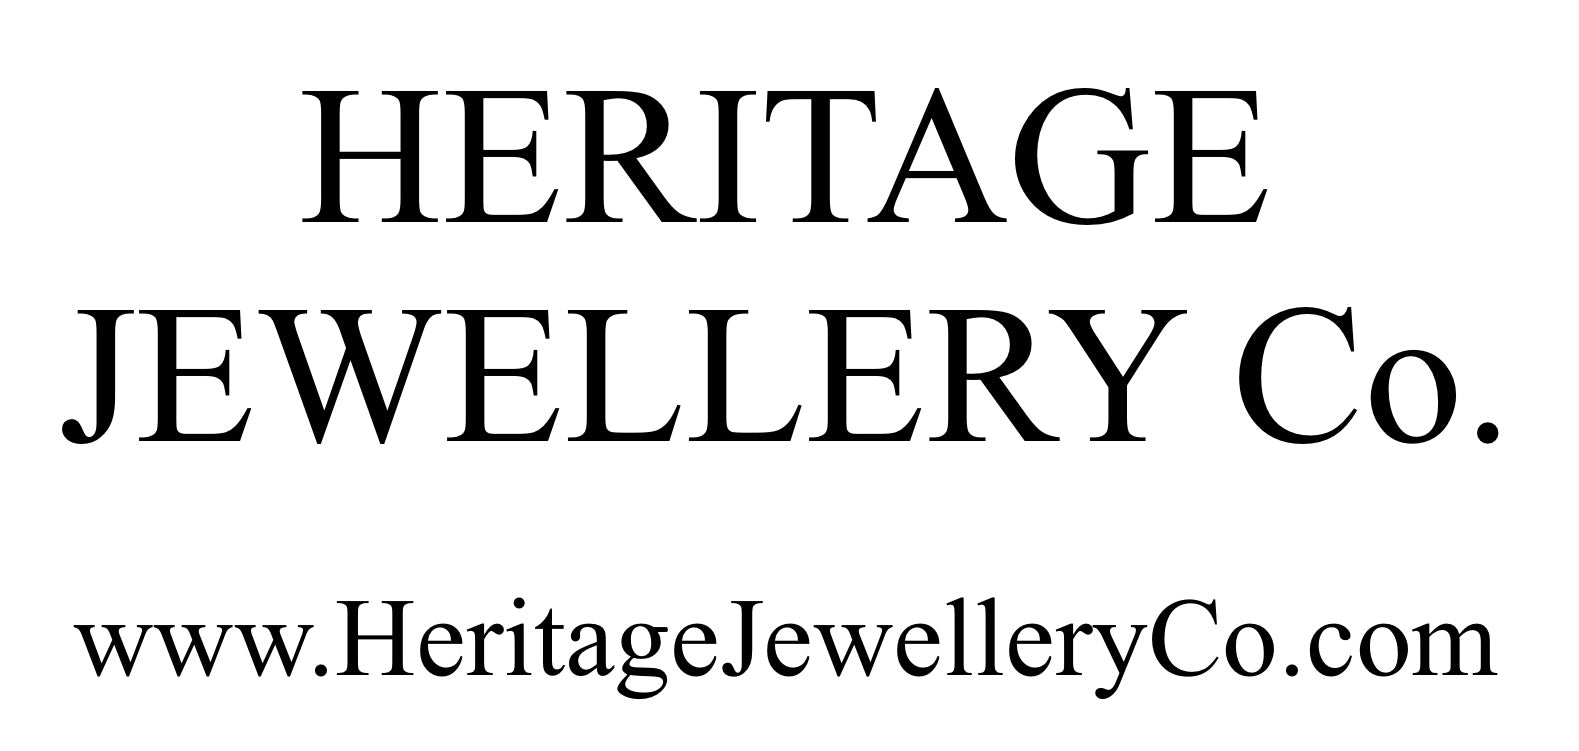 Heritage Jewellery Co is an antique jewellery and vintage jewellery store selling victorian, Edwardian, Georgian and contemporary jewellery including rings, bracelets, necklaces and pendants, lockets, cufflinks and more.